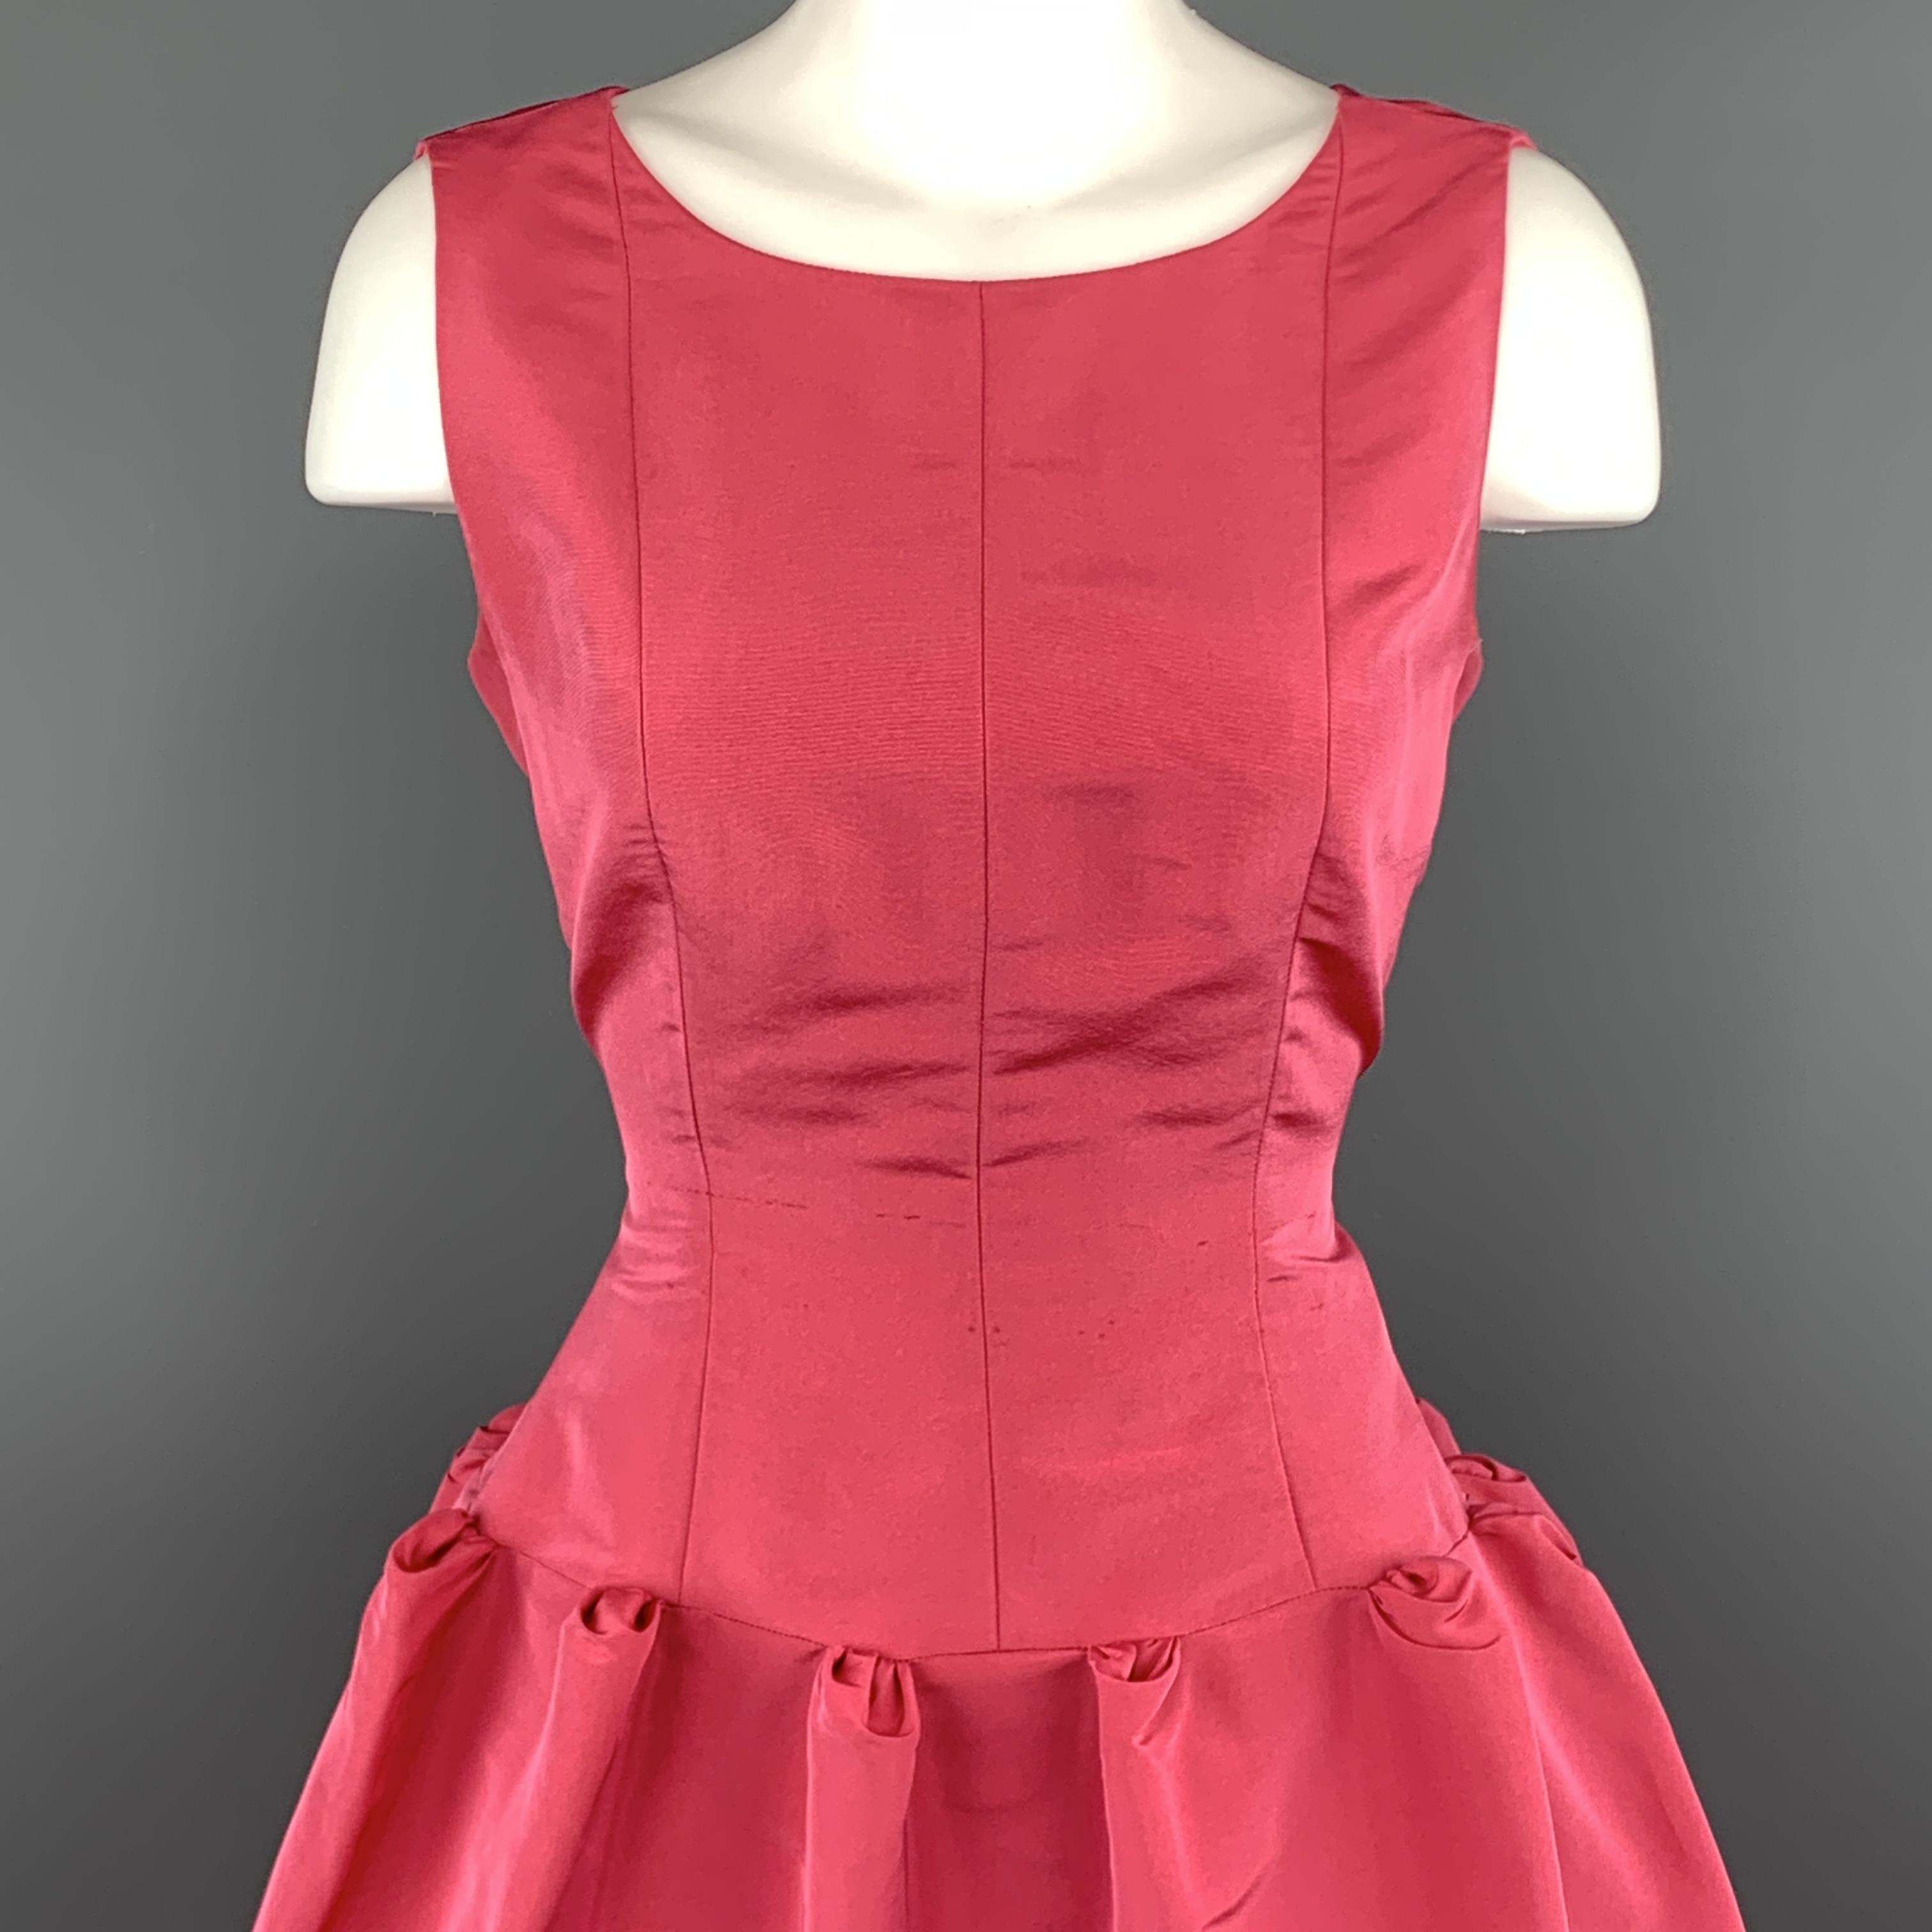 Vintage OSCAR DE LA RENTA cocktail dress comes in pink faille and features a sleeveless, fitted bodice and structures drop waist skirt with cascading structured gather pleat ruffles. Famously worn in the final season of Sex & the City by Carrie